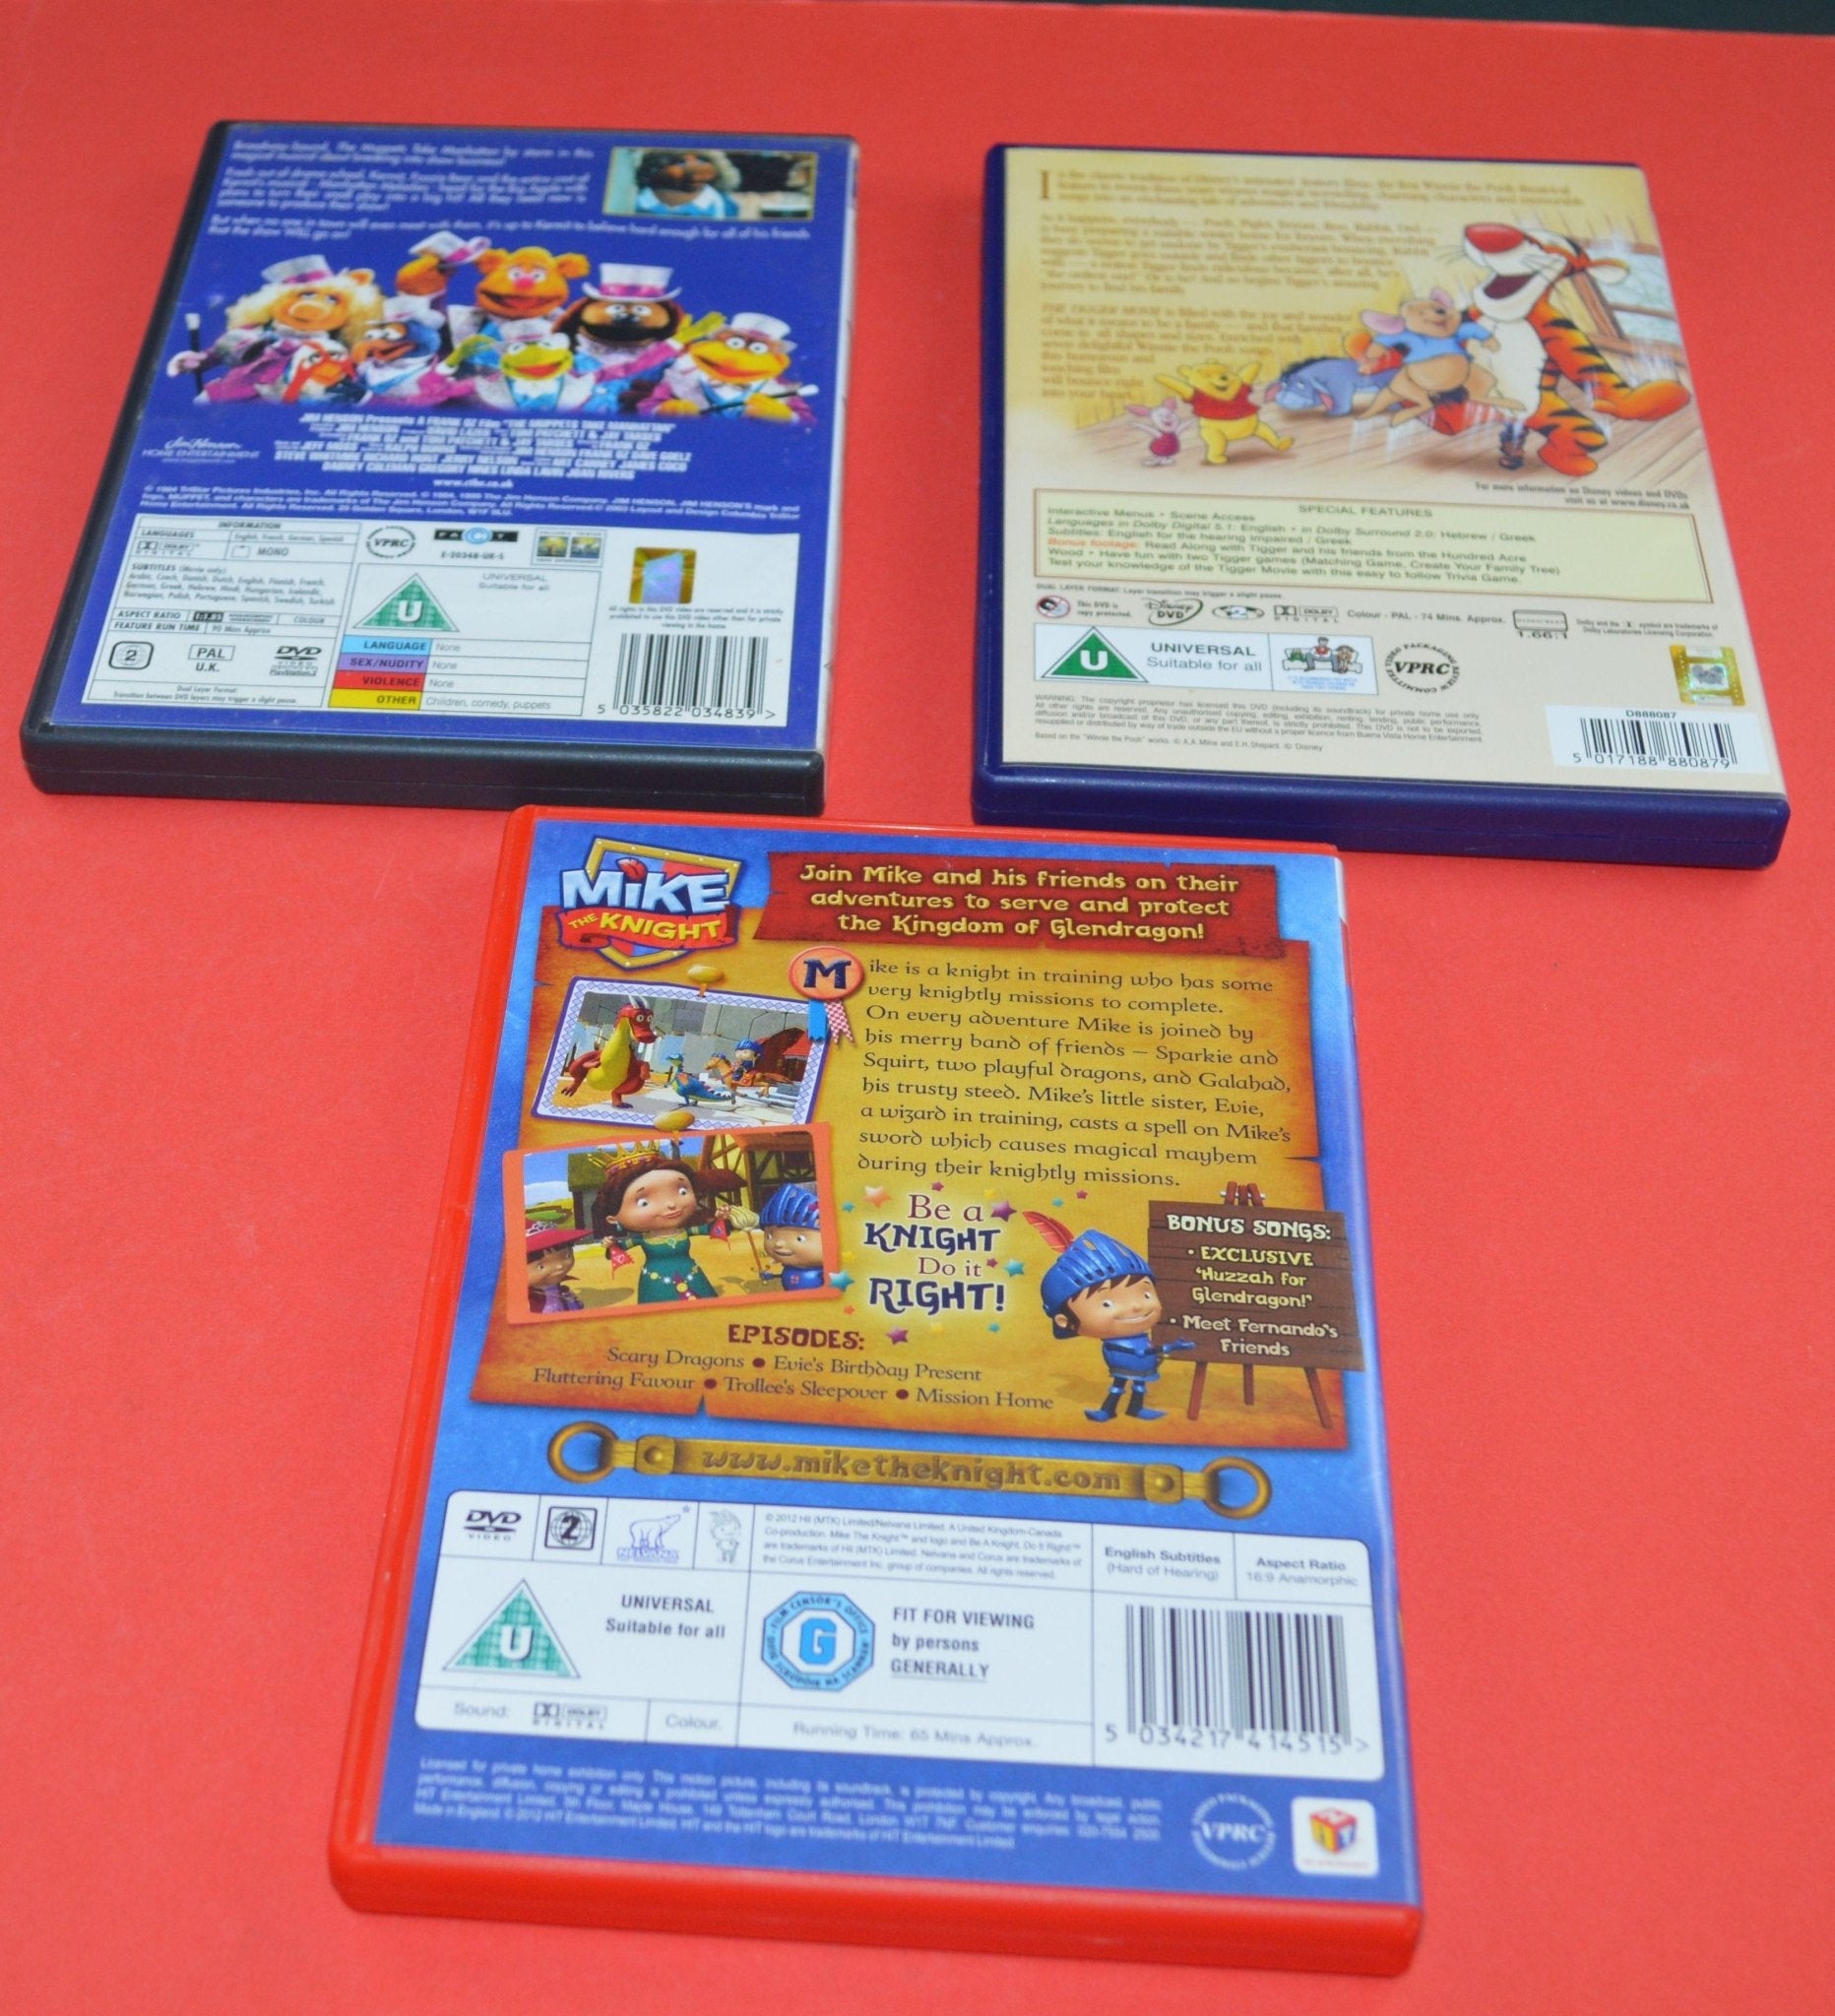 SIX CHILDREN'S DVD'S(PREVIOUSLY OWNED) GOOD CONDITION - TMD167207